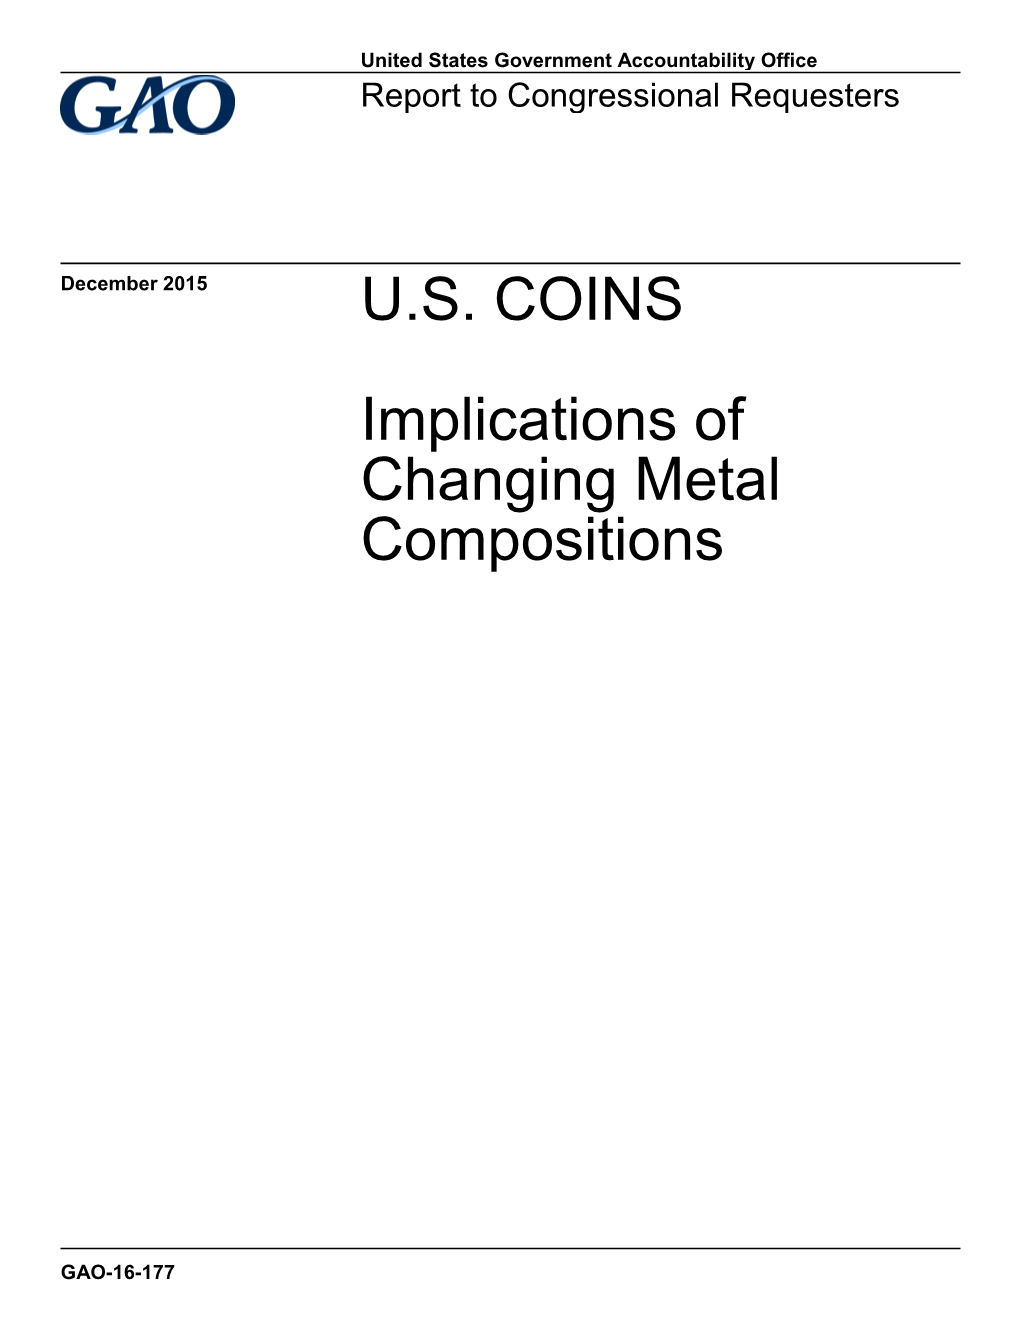 US Coins: Implications of Changing Metal Compositions